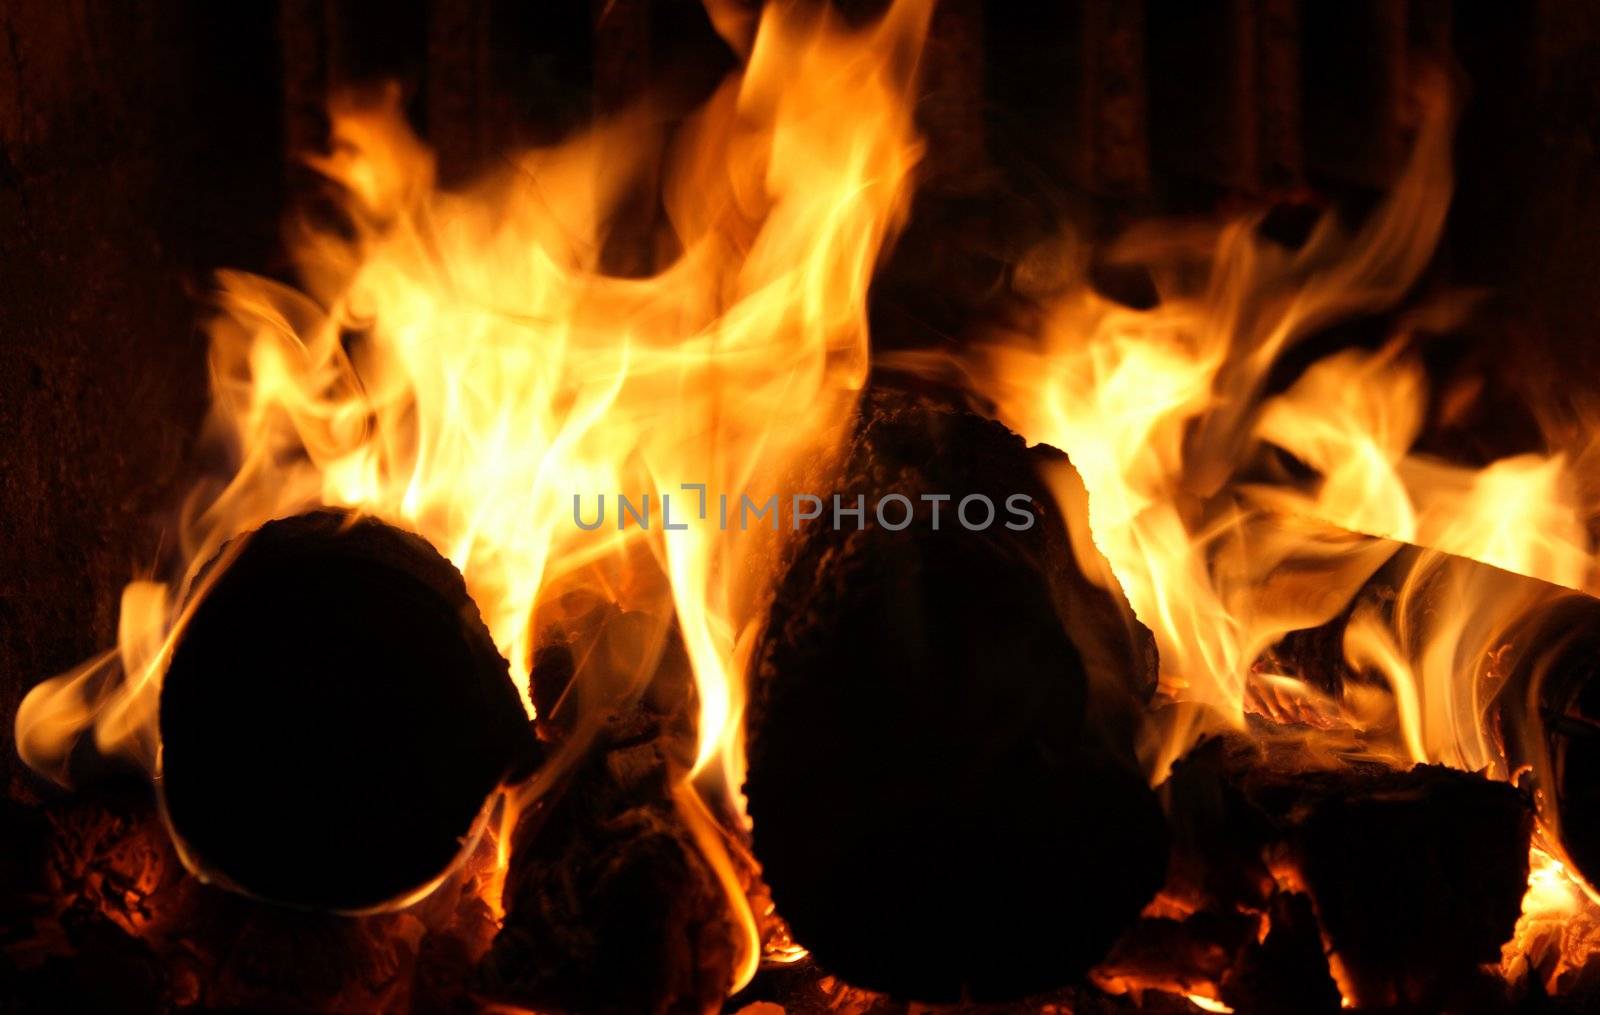 Burning logs in the fireplace by anikasalsera